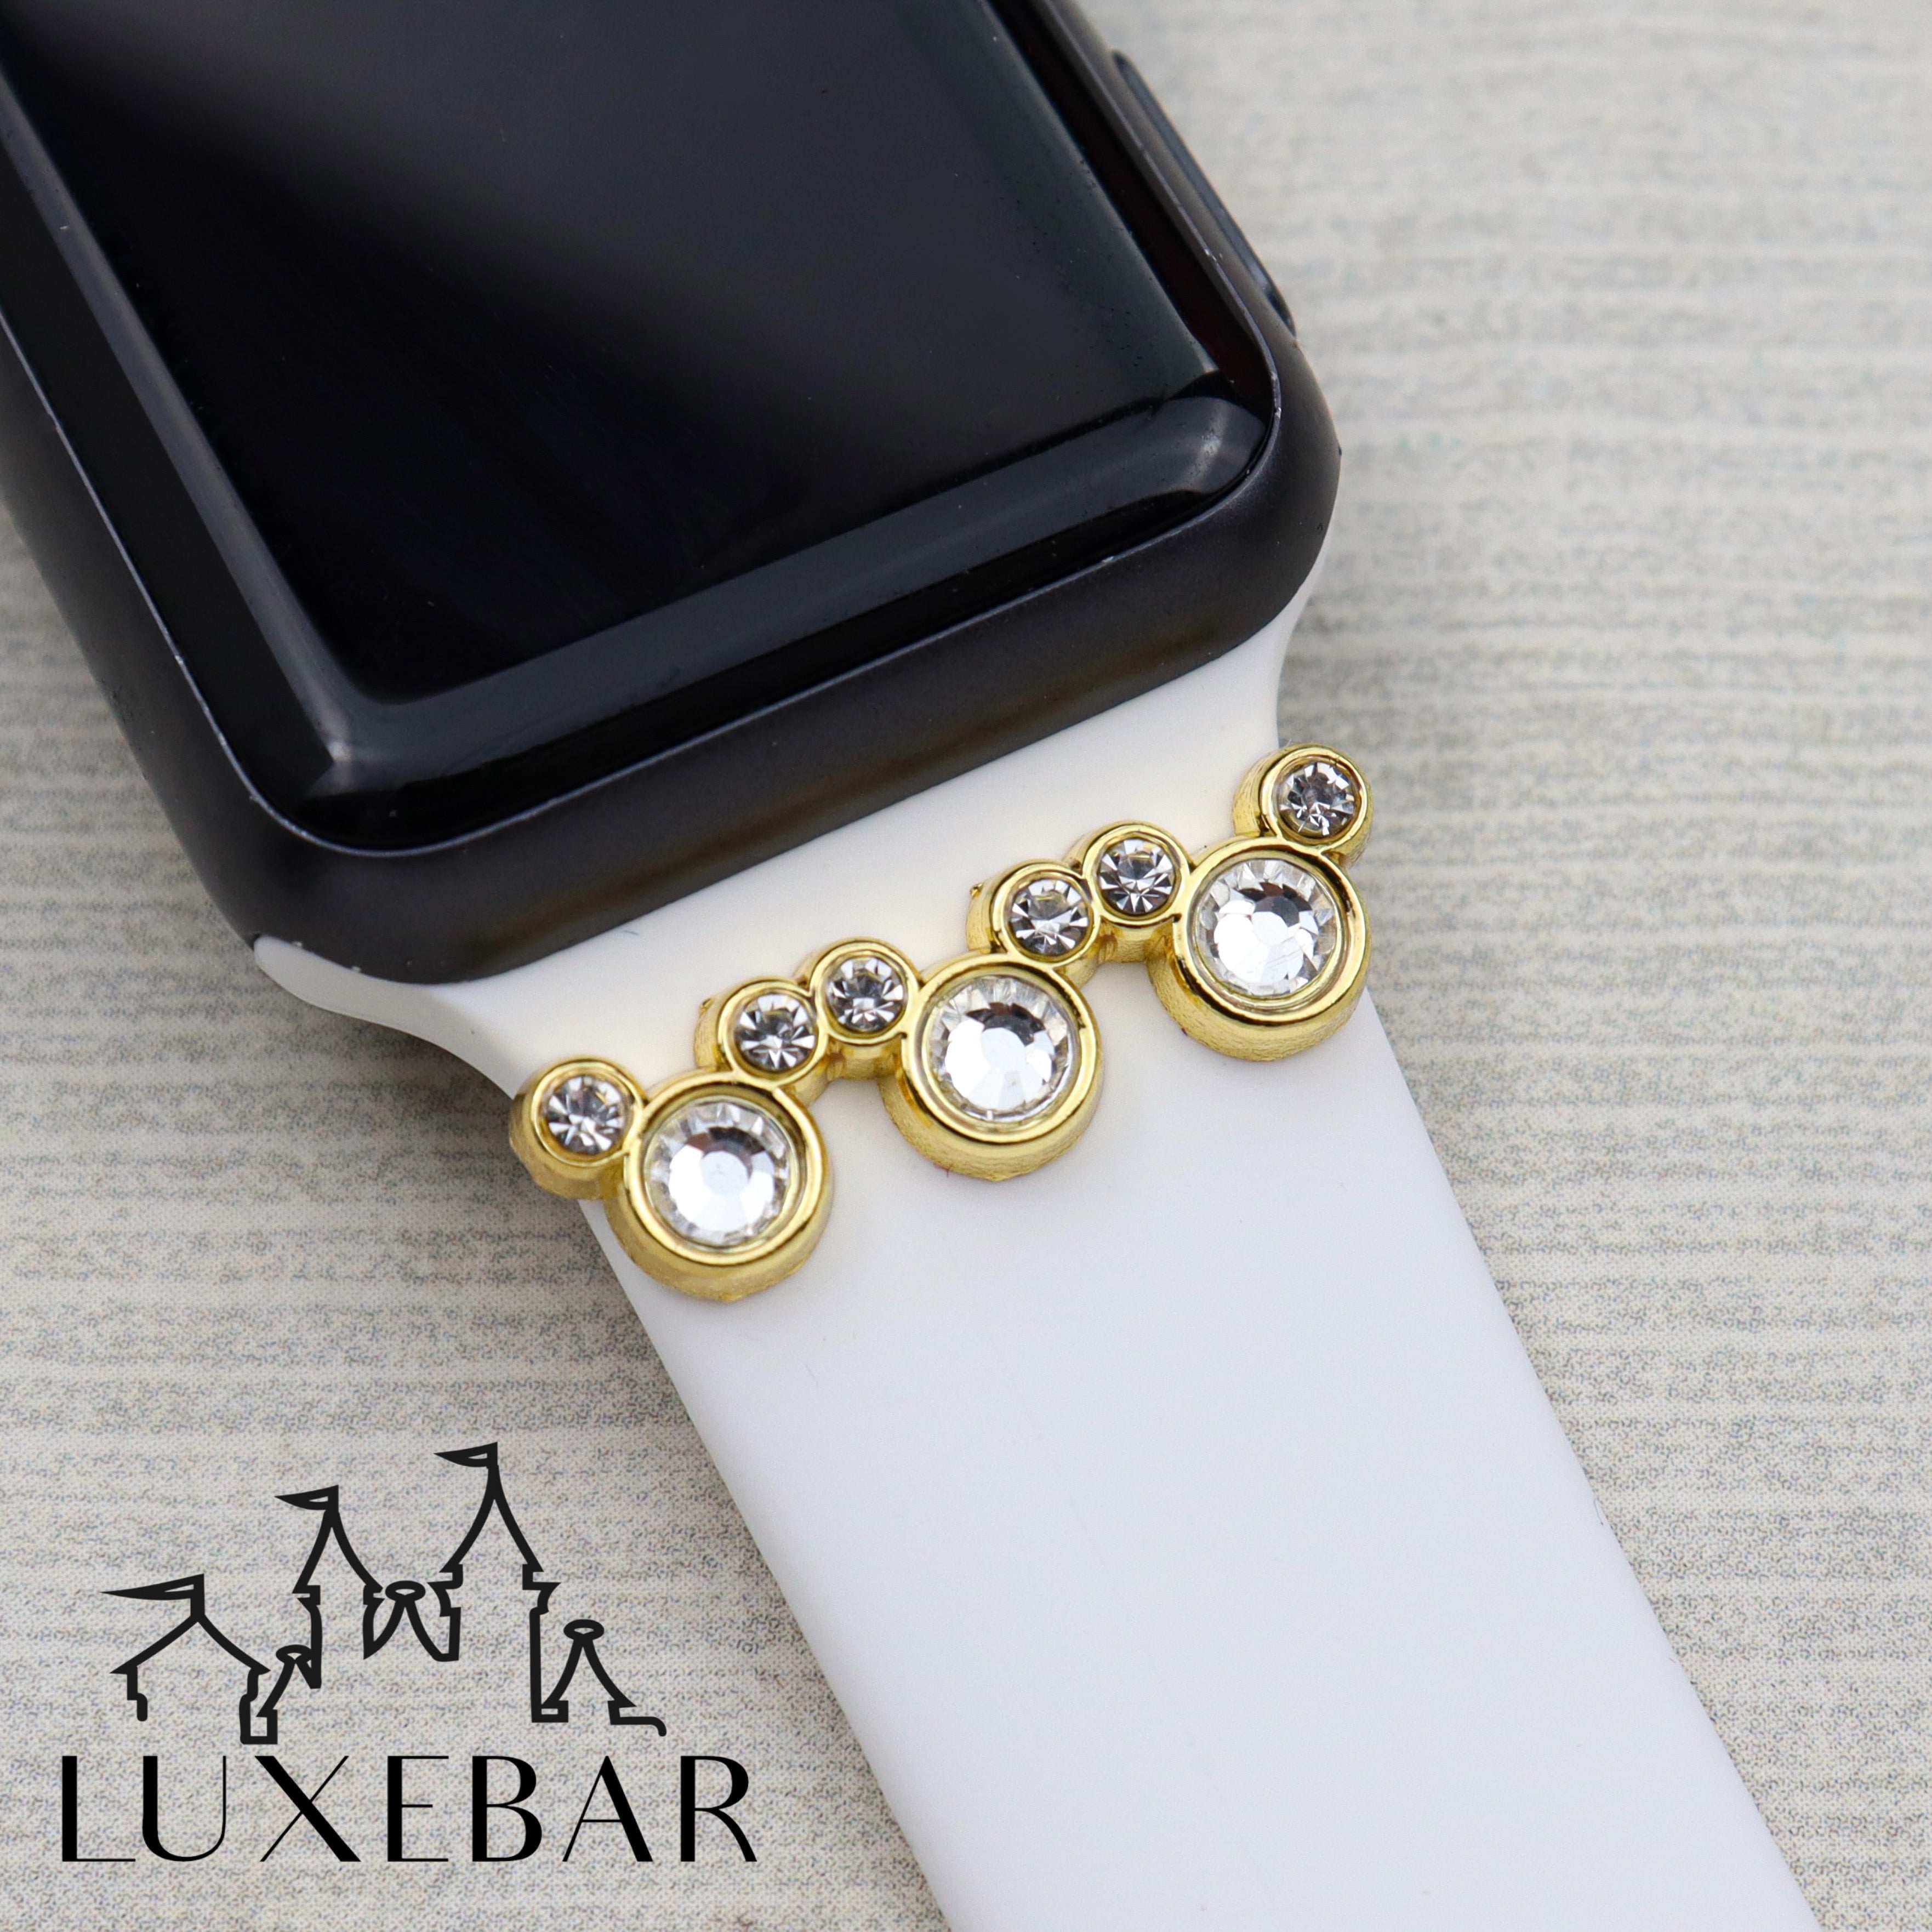 LuxeBar Sparkle ~ Mr. Mouse Triple Stacking Bar (more colors available)